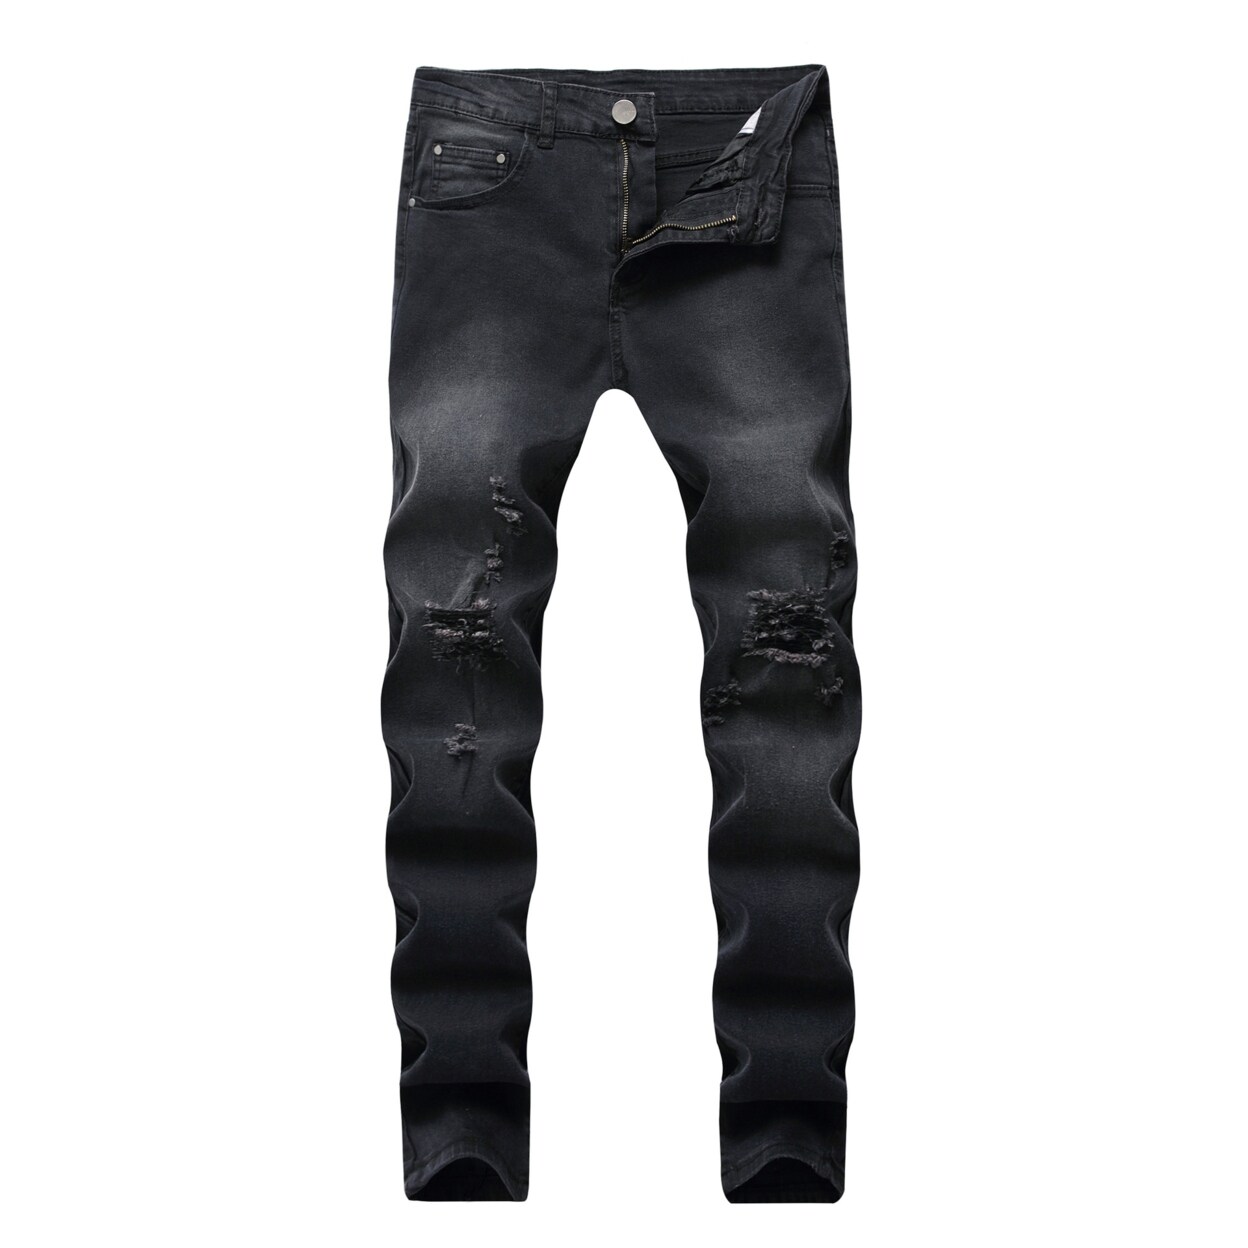 mens jeans ripped black